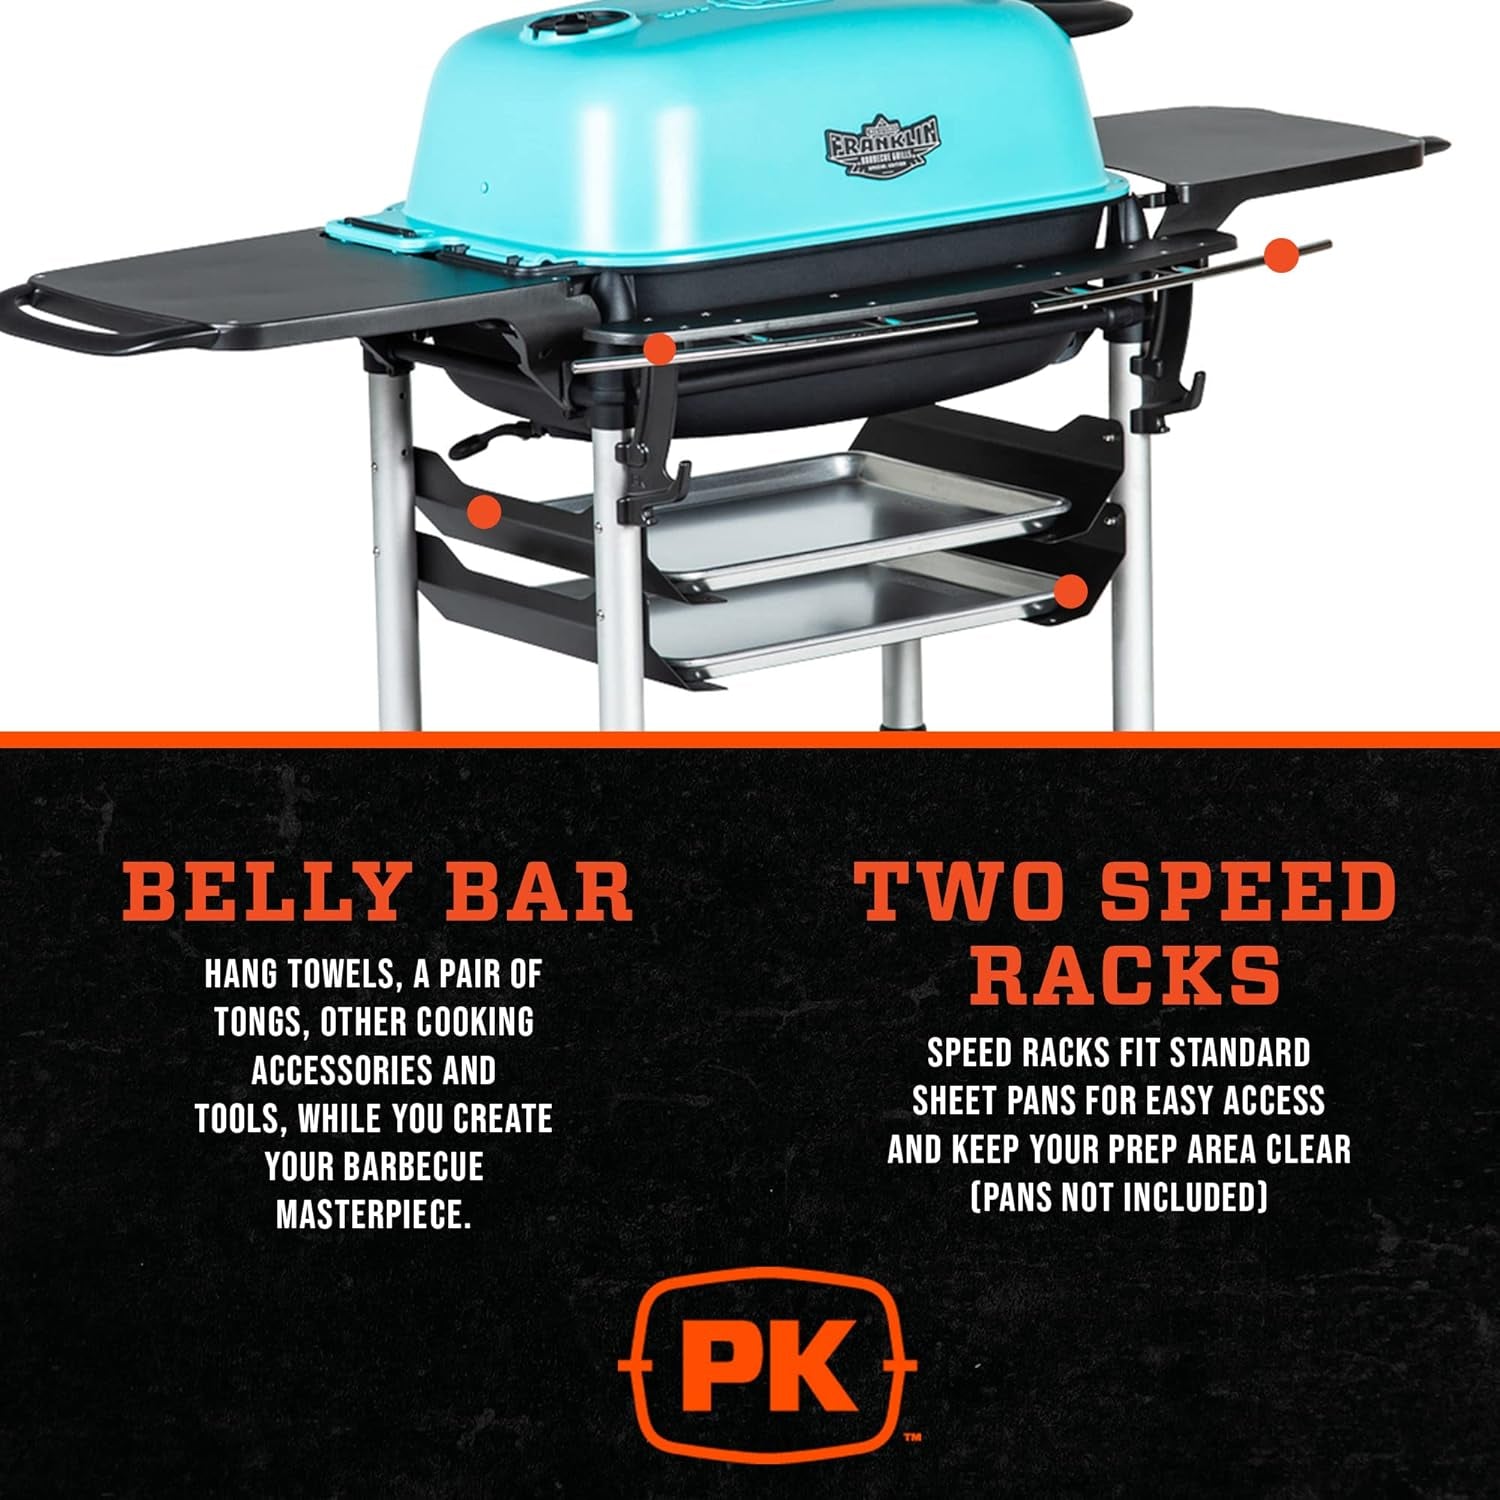 Portable Charcoal BBQ Grill and Smoker, Cast Aluminum Outdoor Kitchen Barbecue Grill for Camping, Backyard Grilling, Park, Tailgating, Teal, ​​New Original PK Aaron Franklin Addition